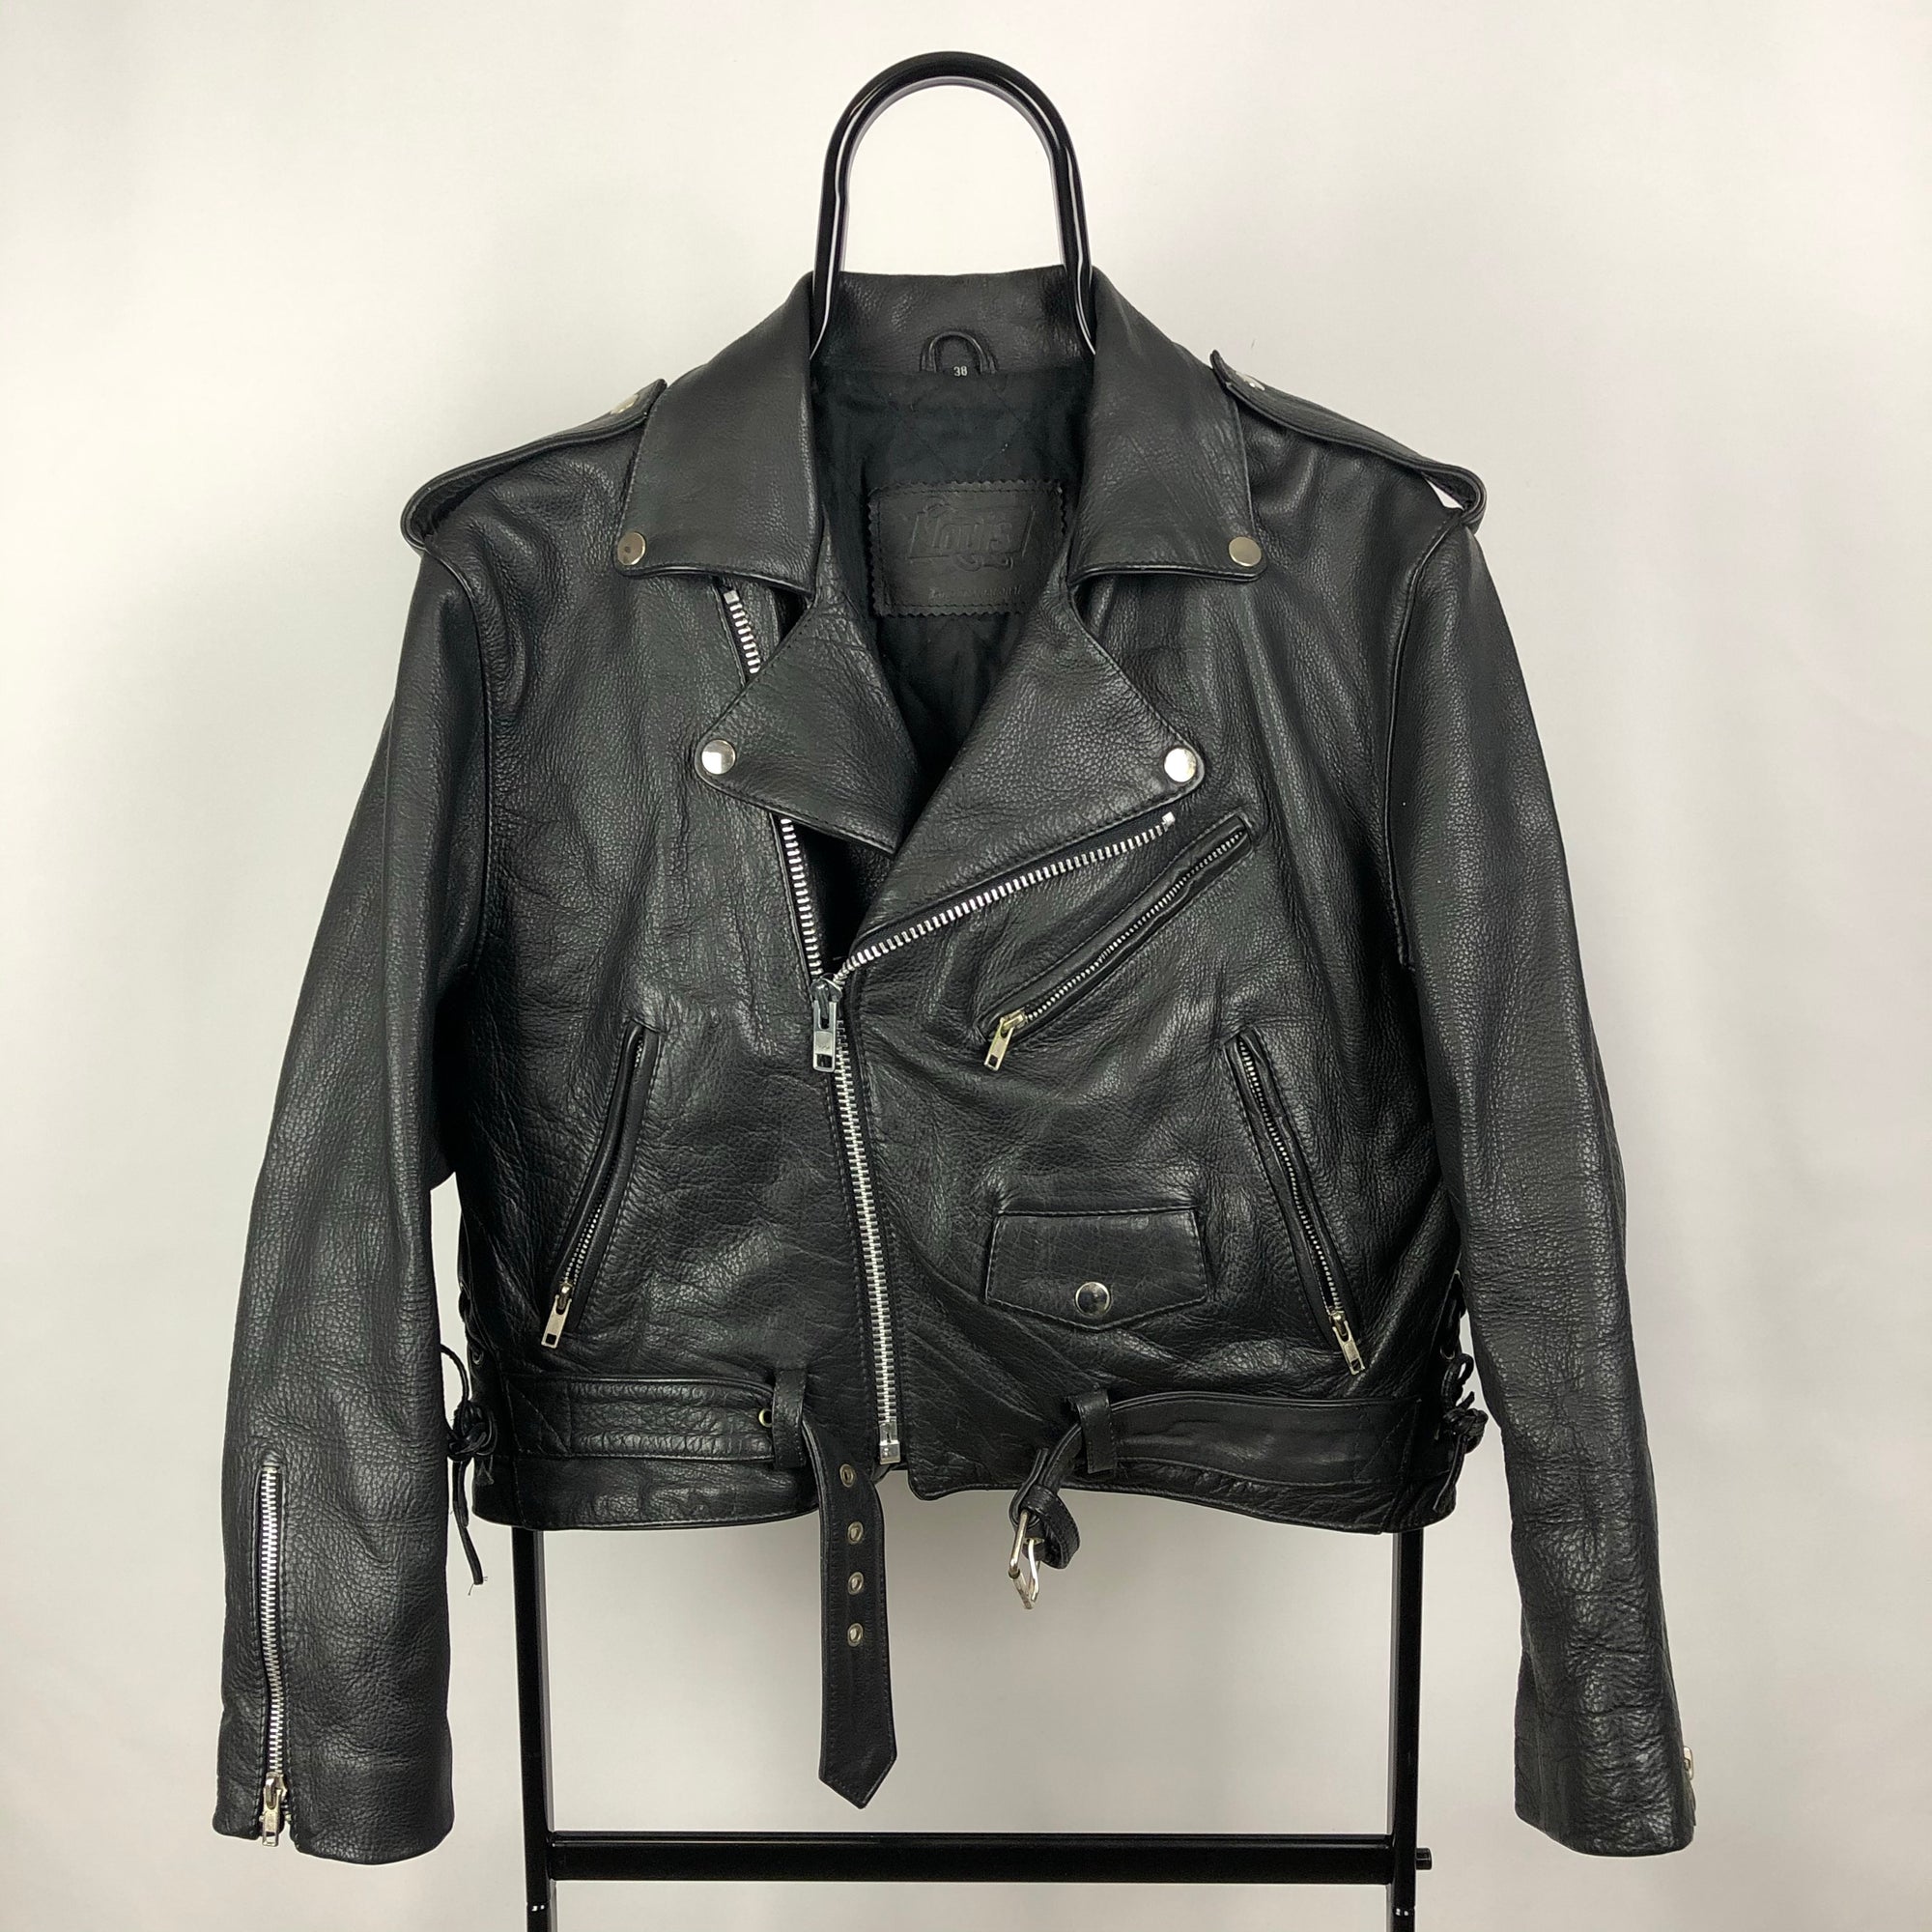 Vintage Leather Jacket in Black - Women’s Small